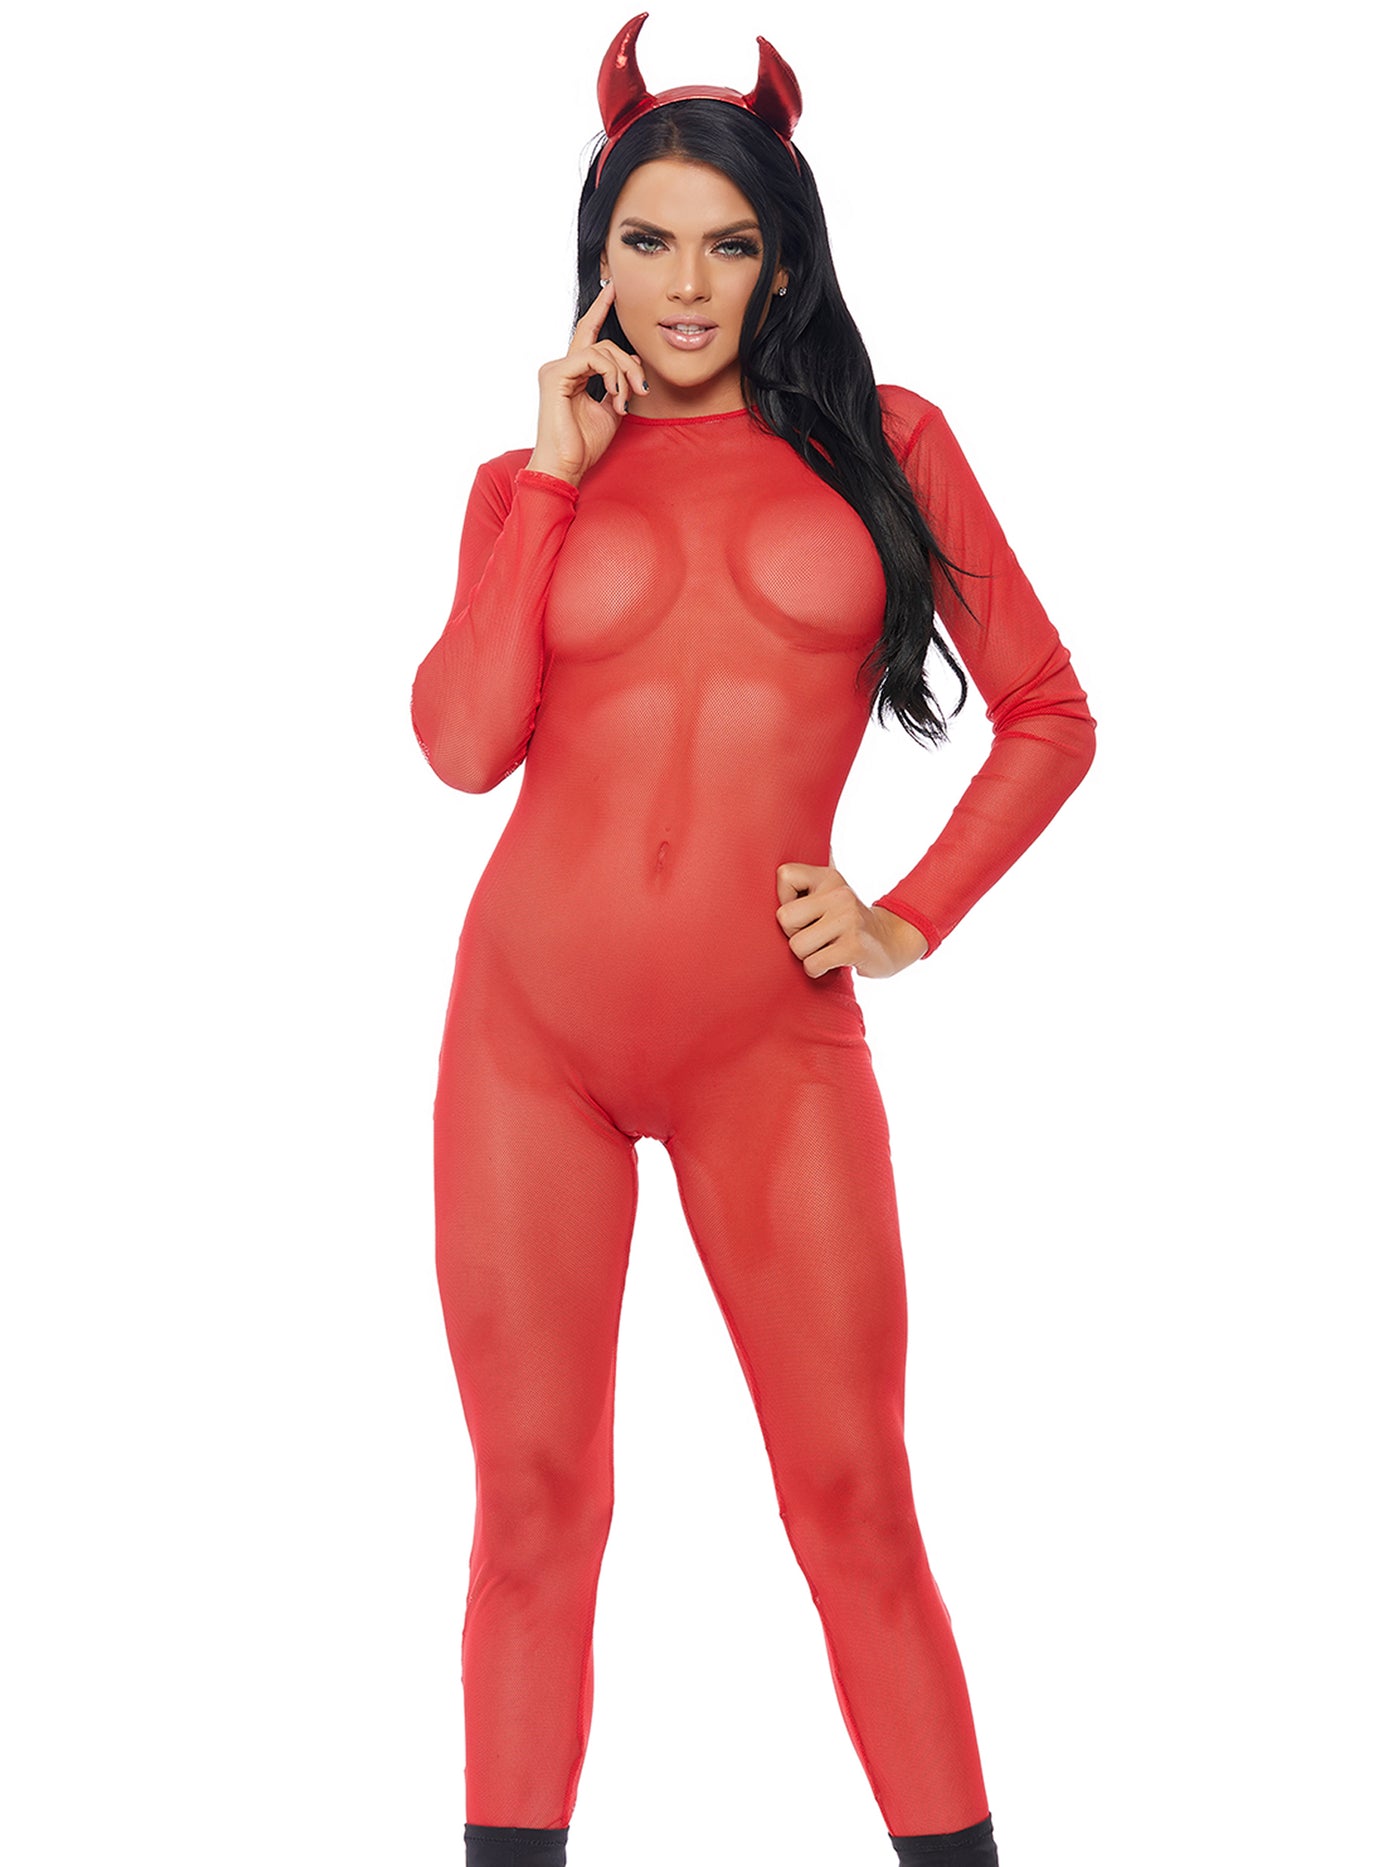 Red Sheer Mesh Micronet Catsuit - Shop Fortune Costumes Lingerie